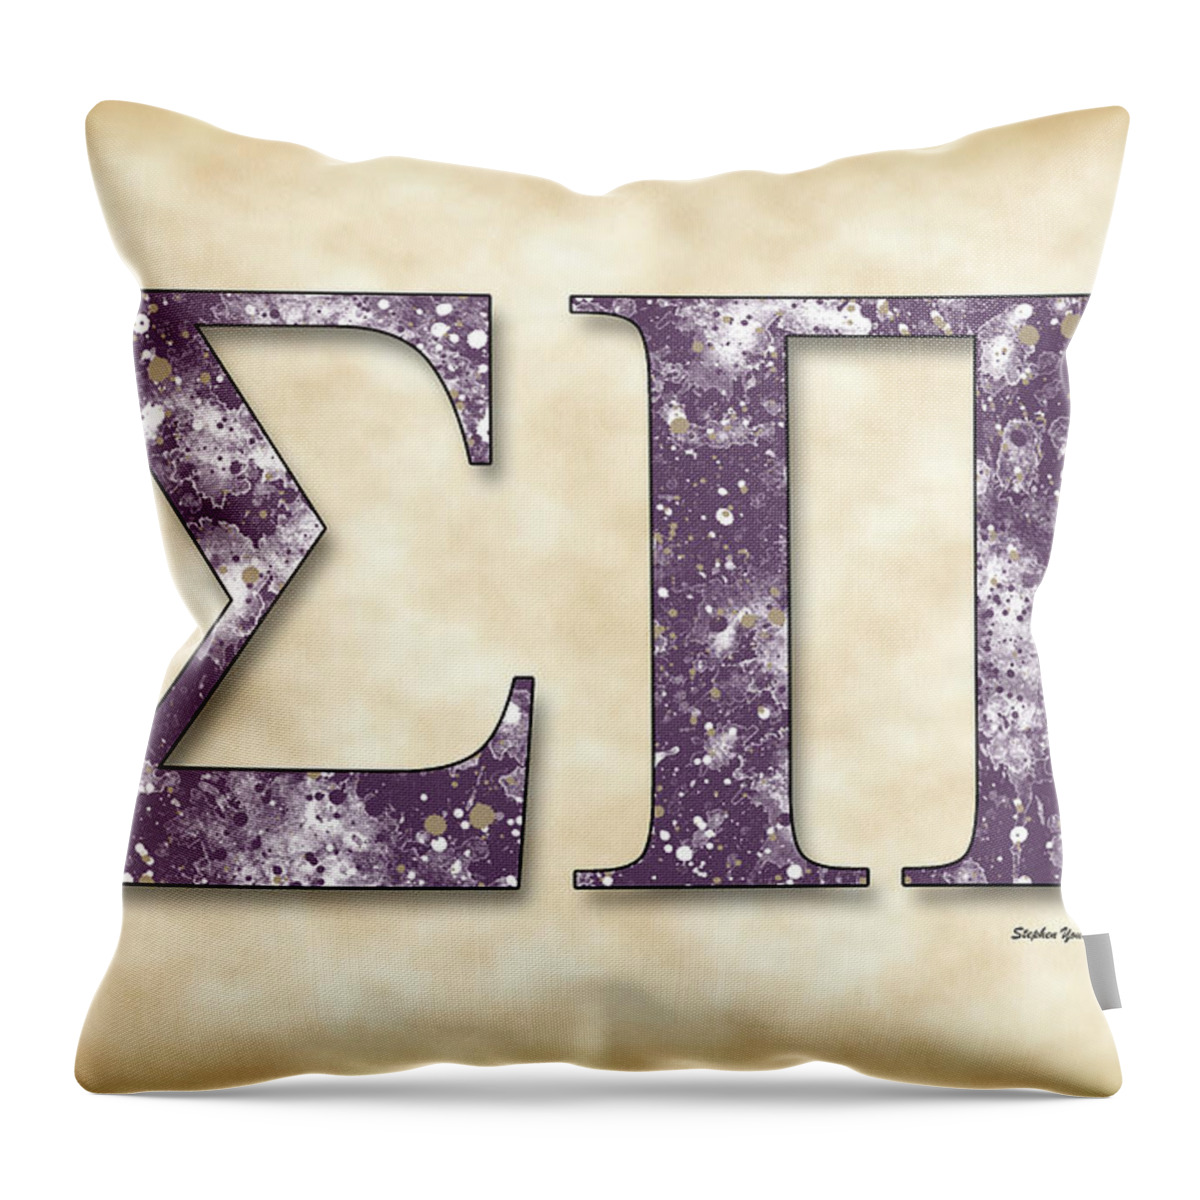 Sigma Pi Throw Pillow featuring the digital art Sigma Pi - Parchment by Stephen Younts